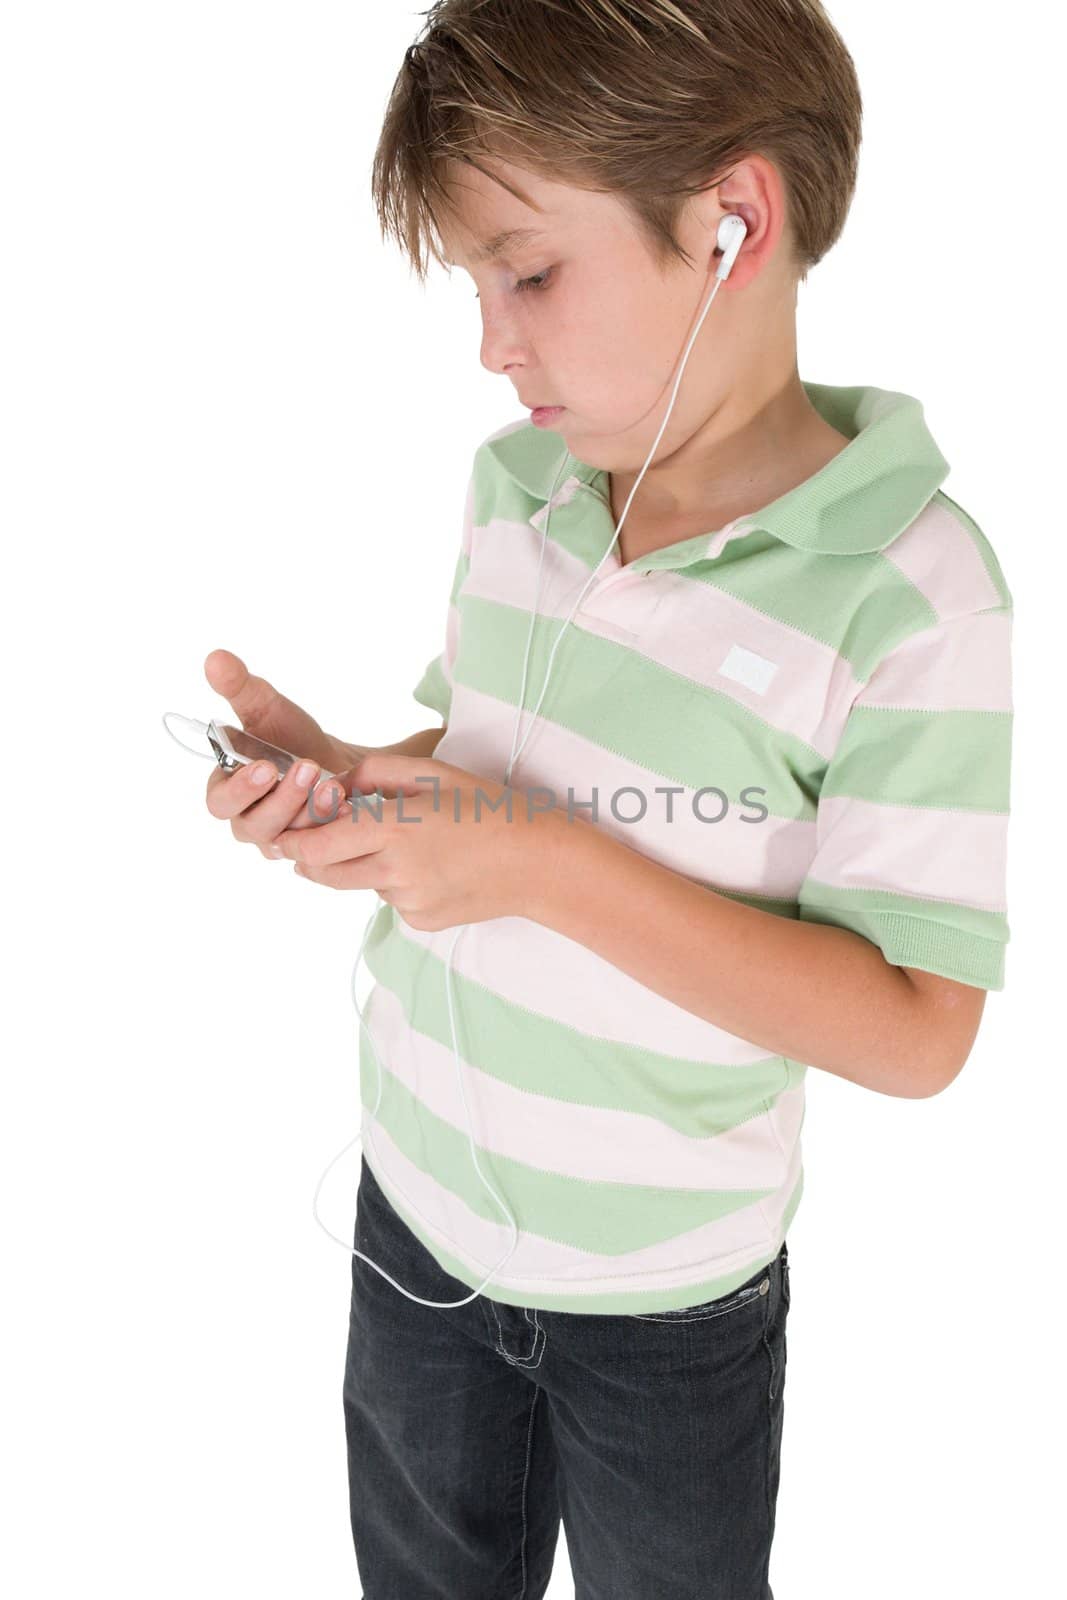 A casual dressed child using an mp3 music player.